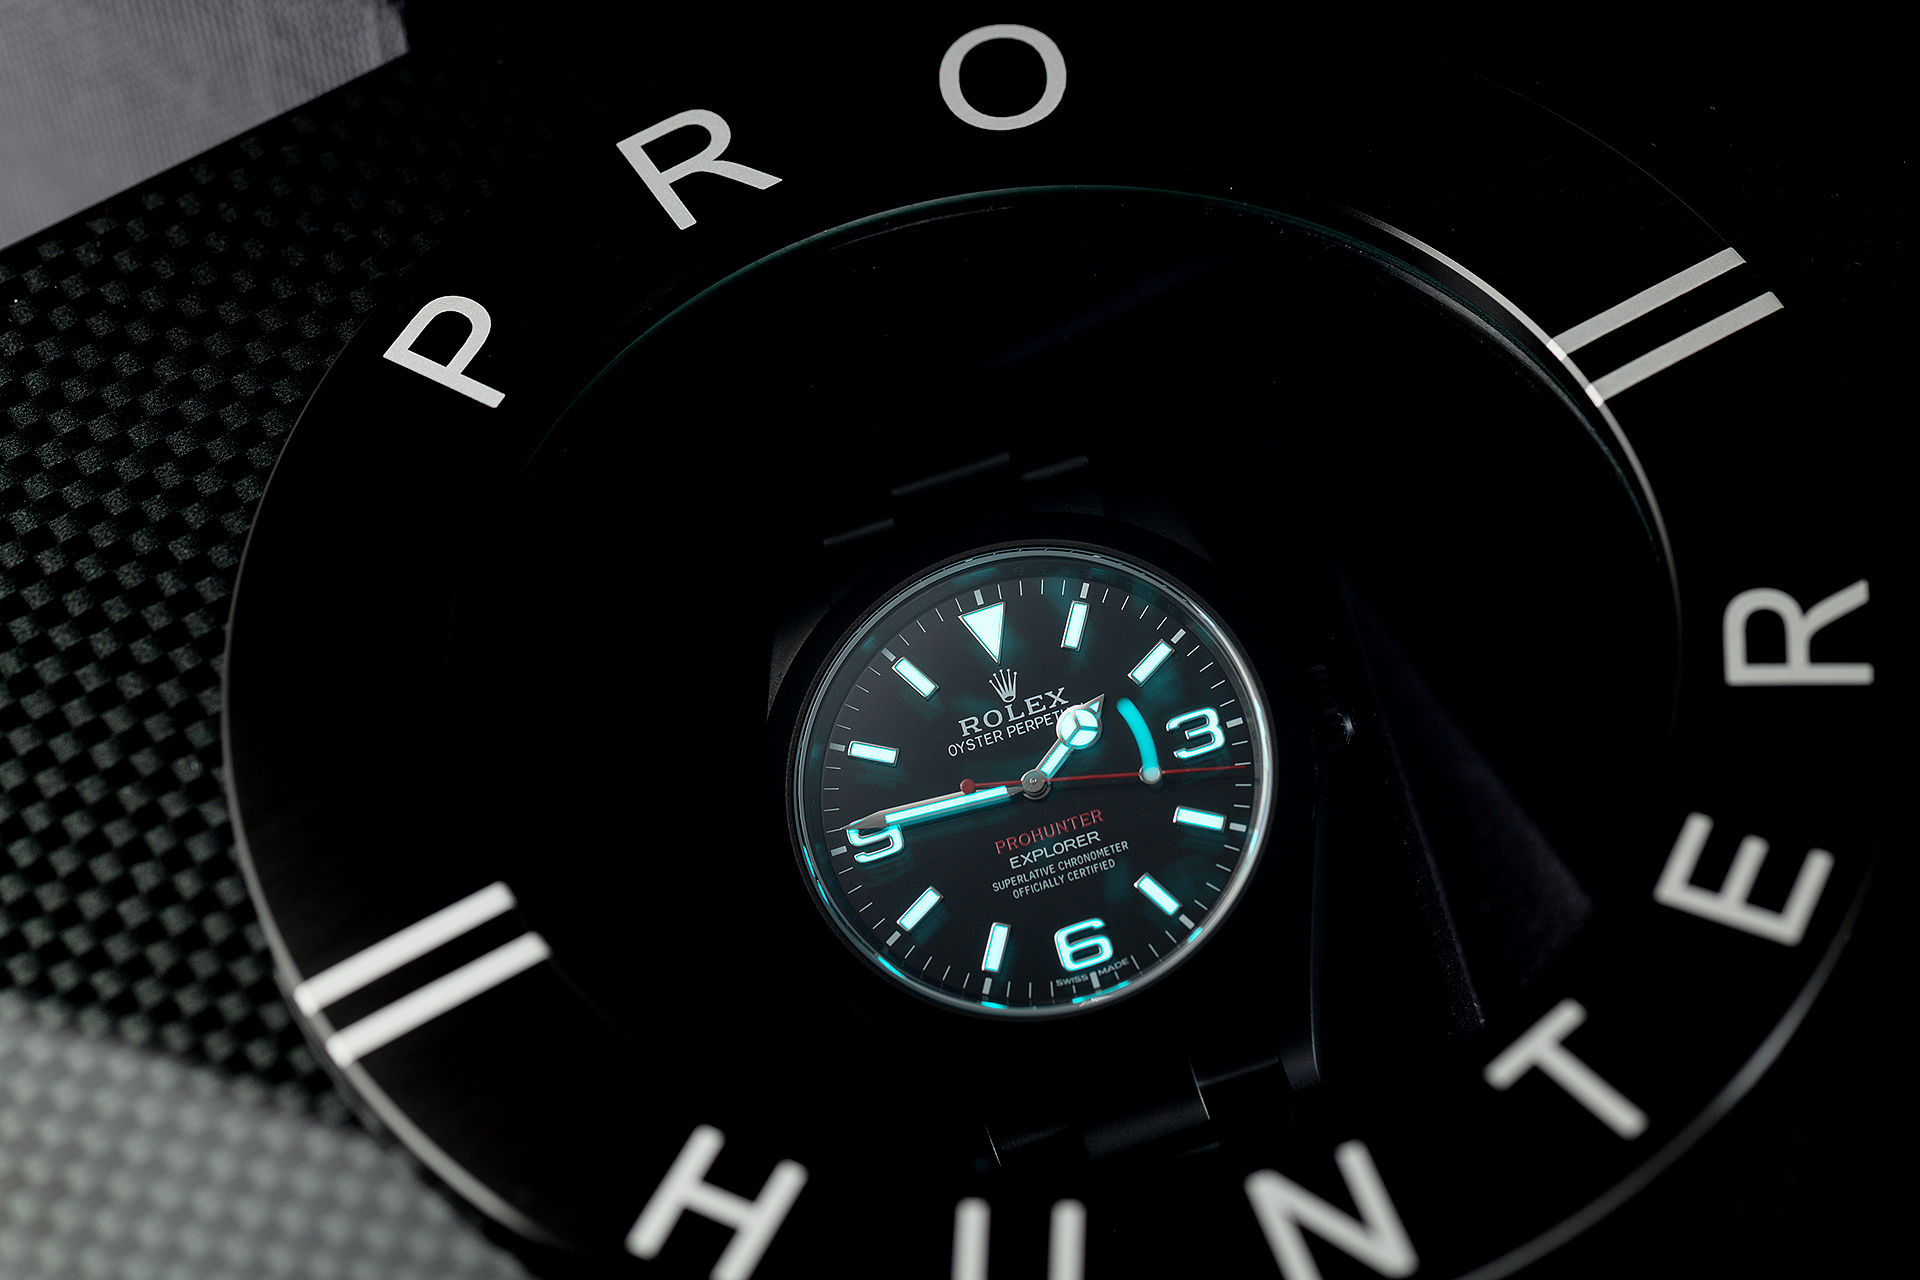 ref 214270 | Limited Edition One of 100 | Pro Hunter Explorer